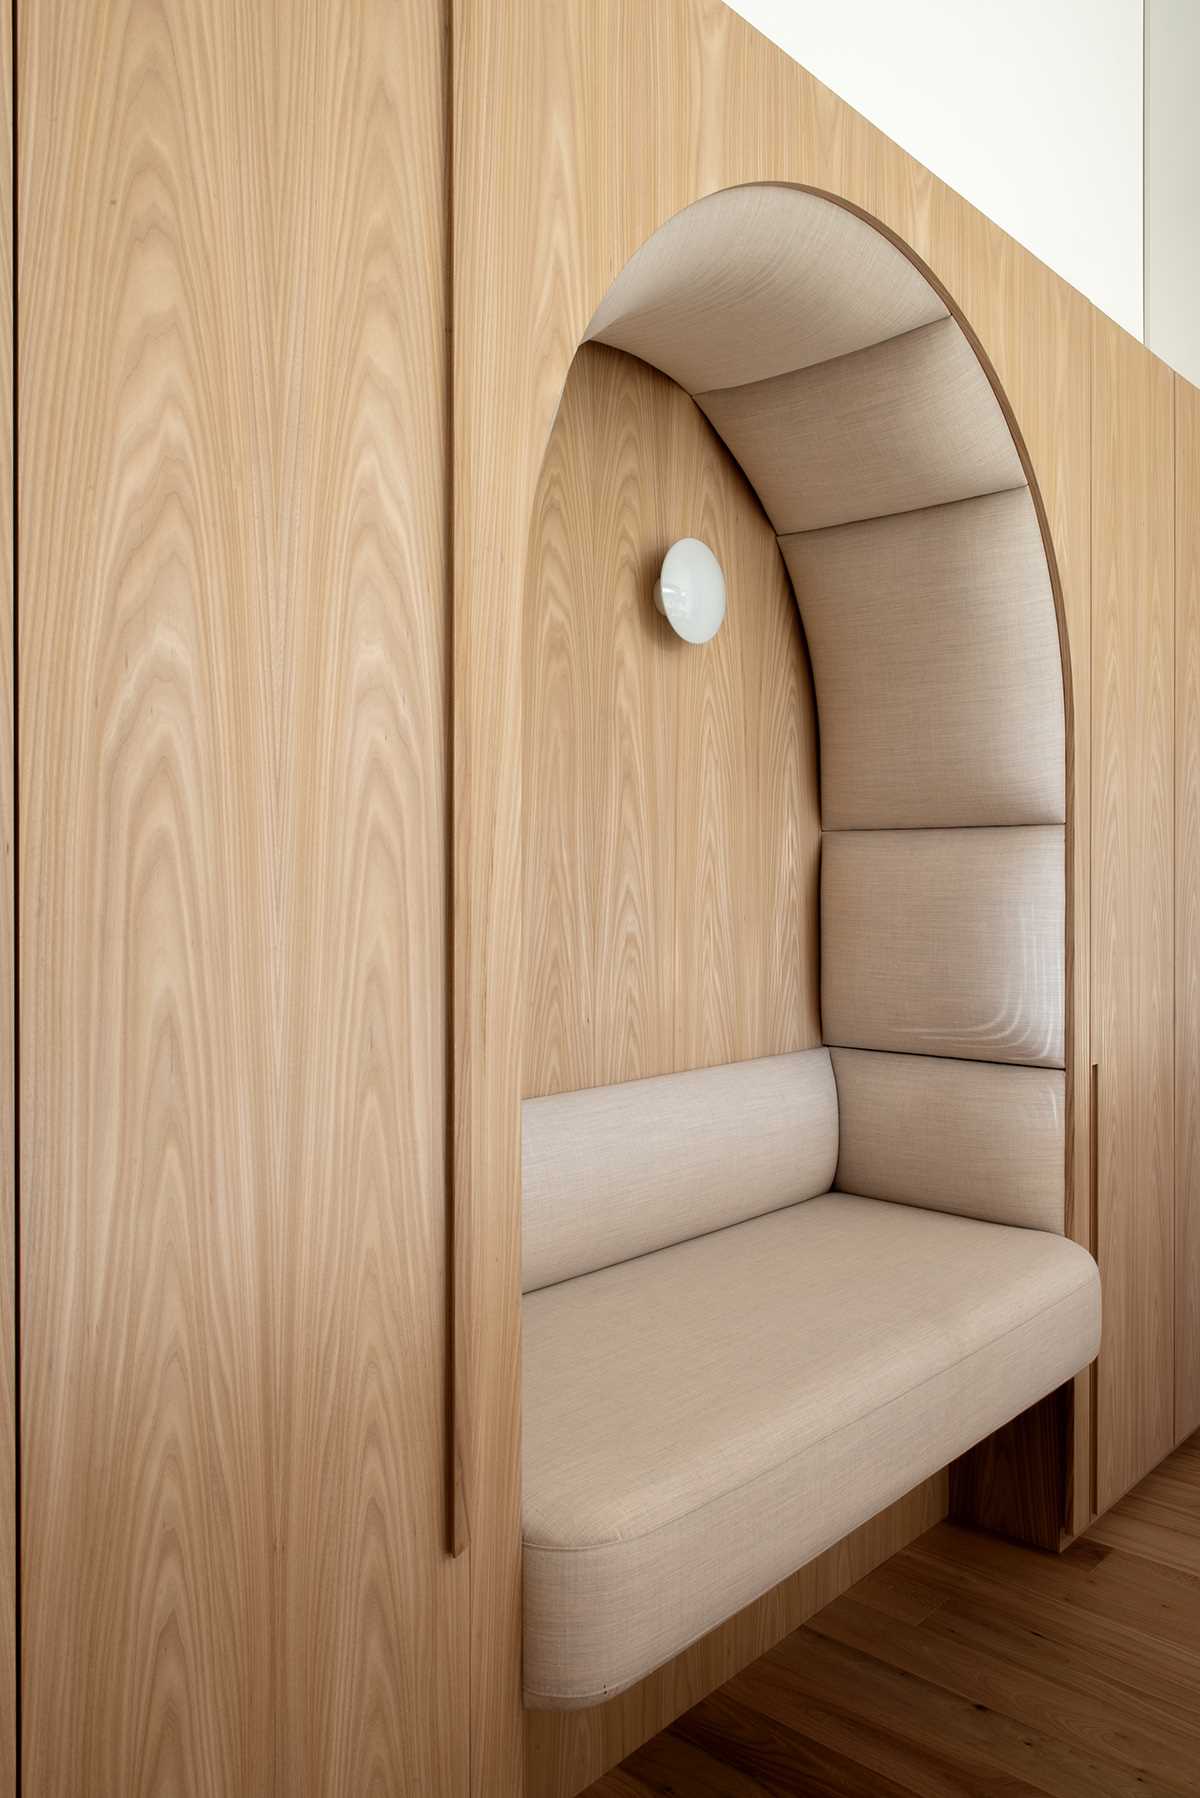 A wall of cabinetry includes a padded built-in bench.